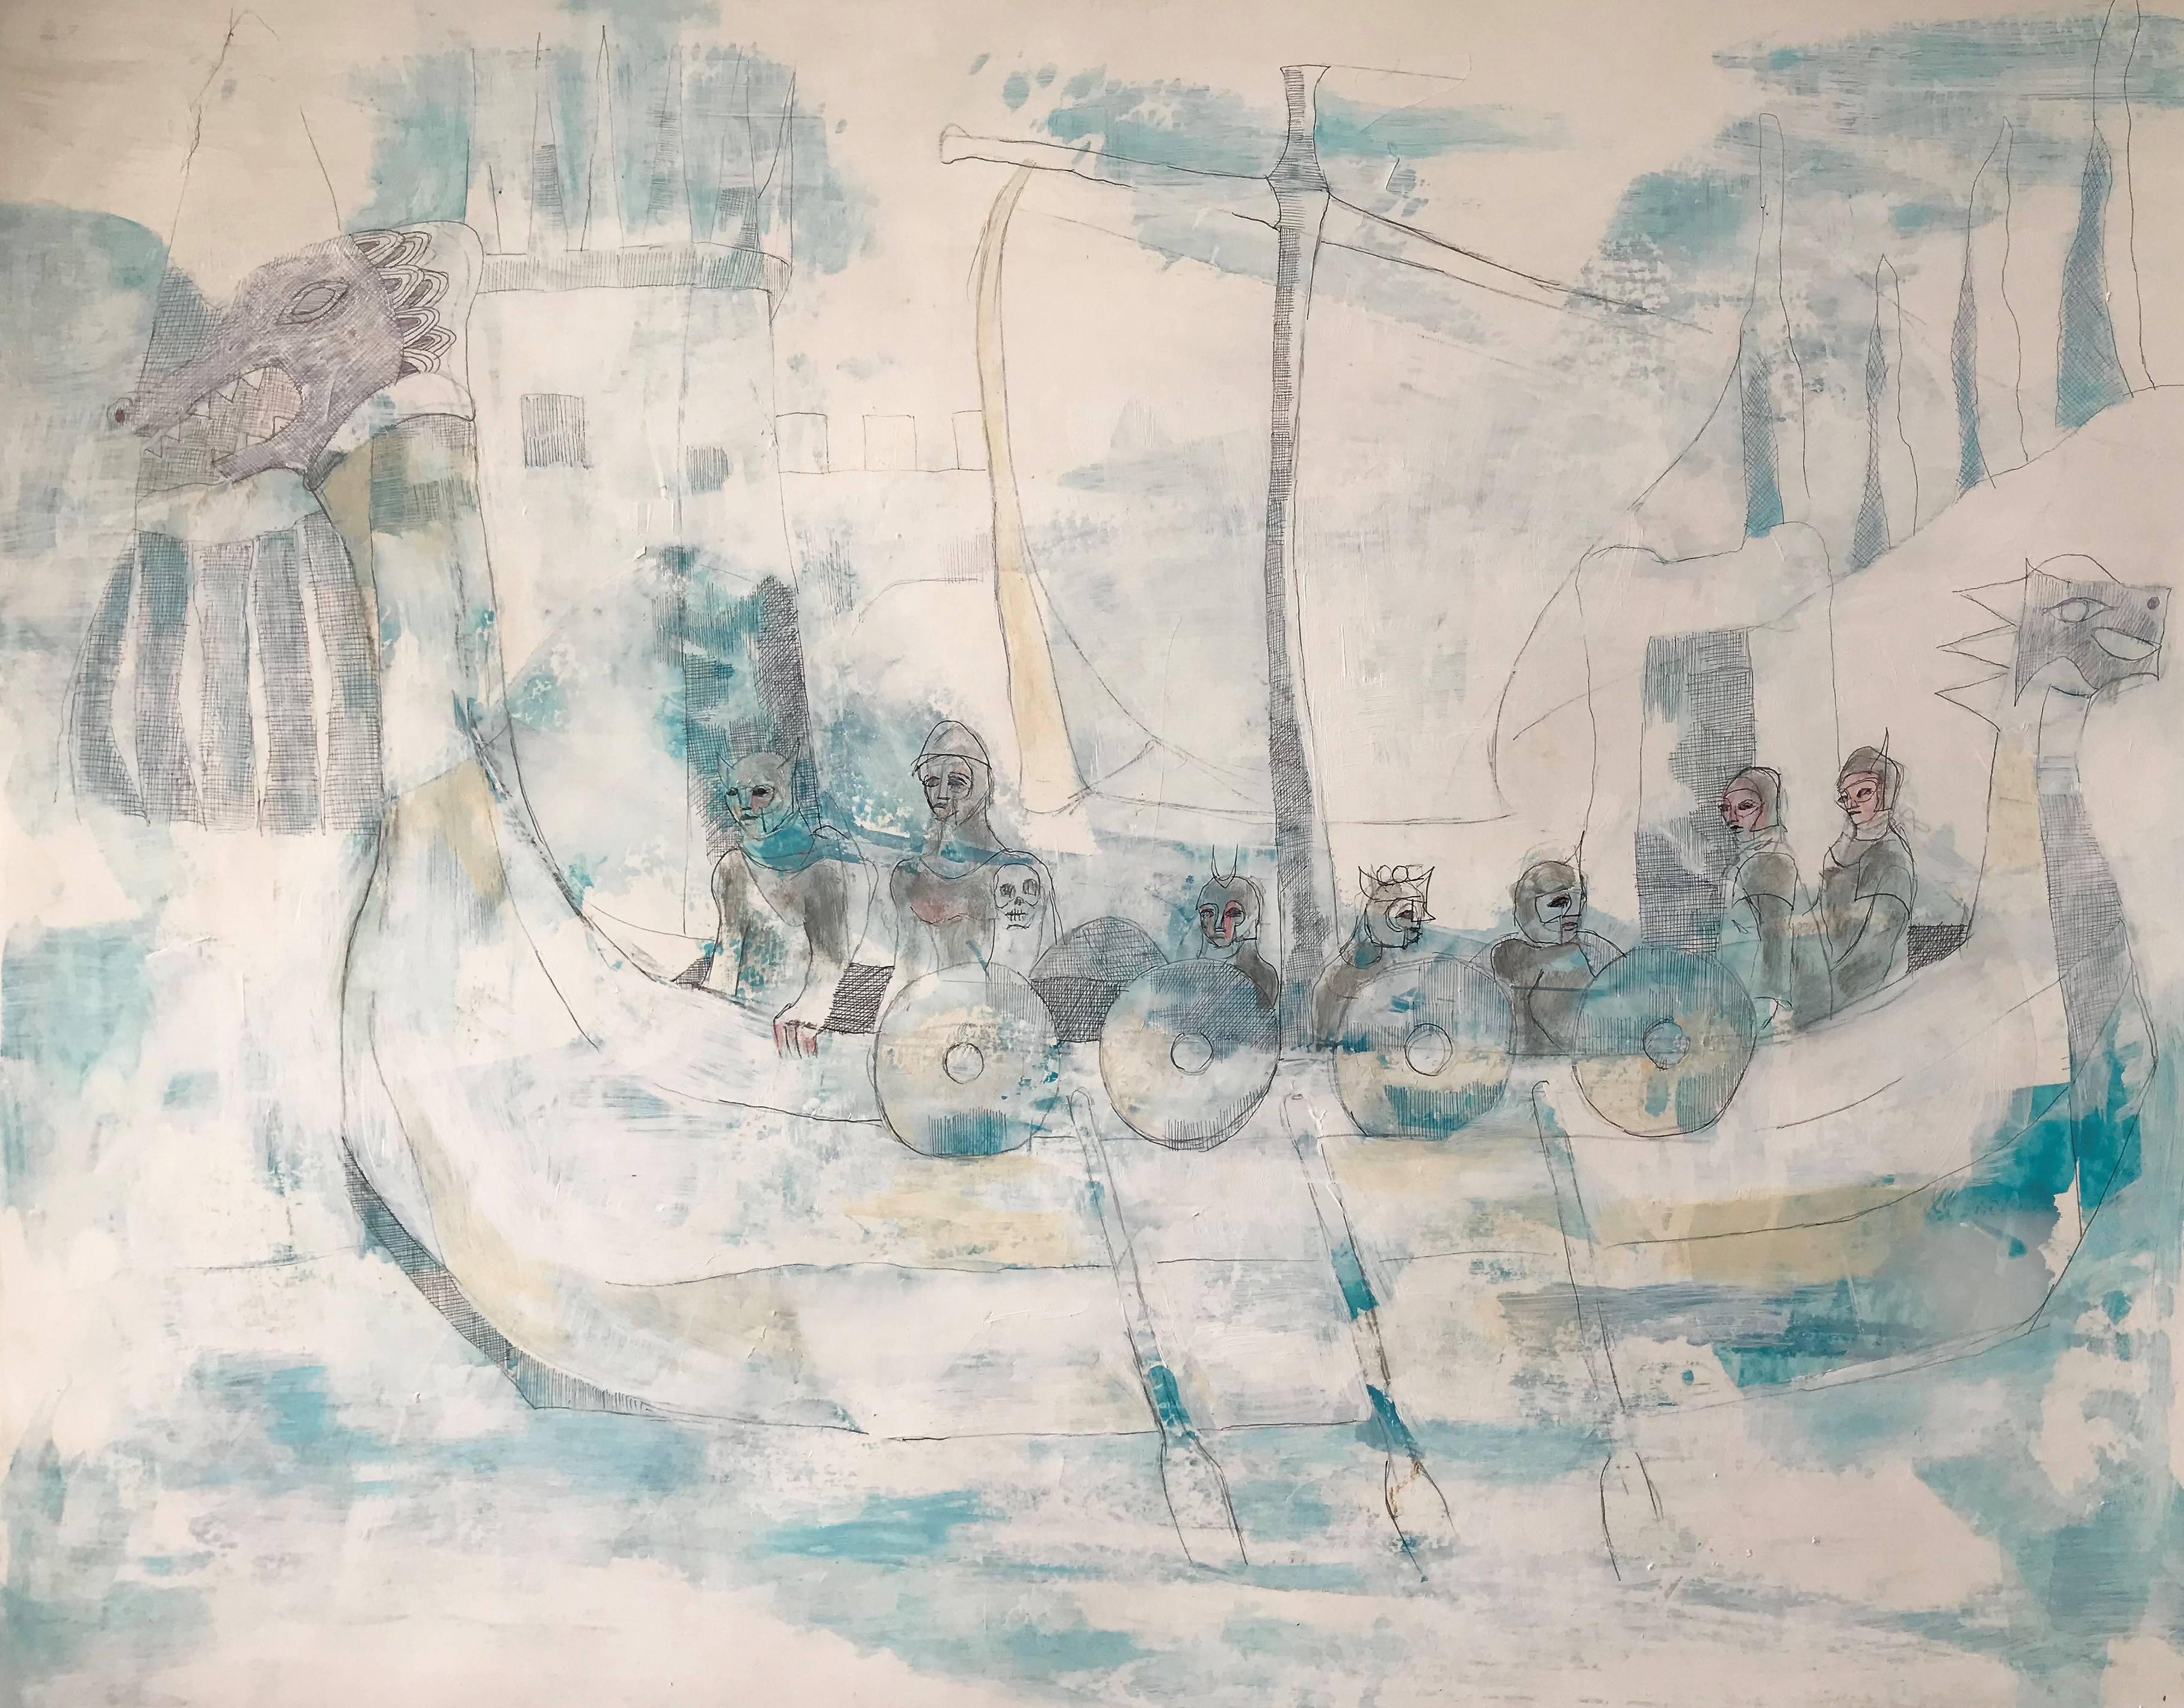 Bai (Carl Karni-Bain) Figurative Painting - Journey of the Ice Ship, acrylic, ink, work on paper, signed by the artist